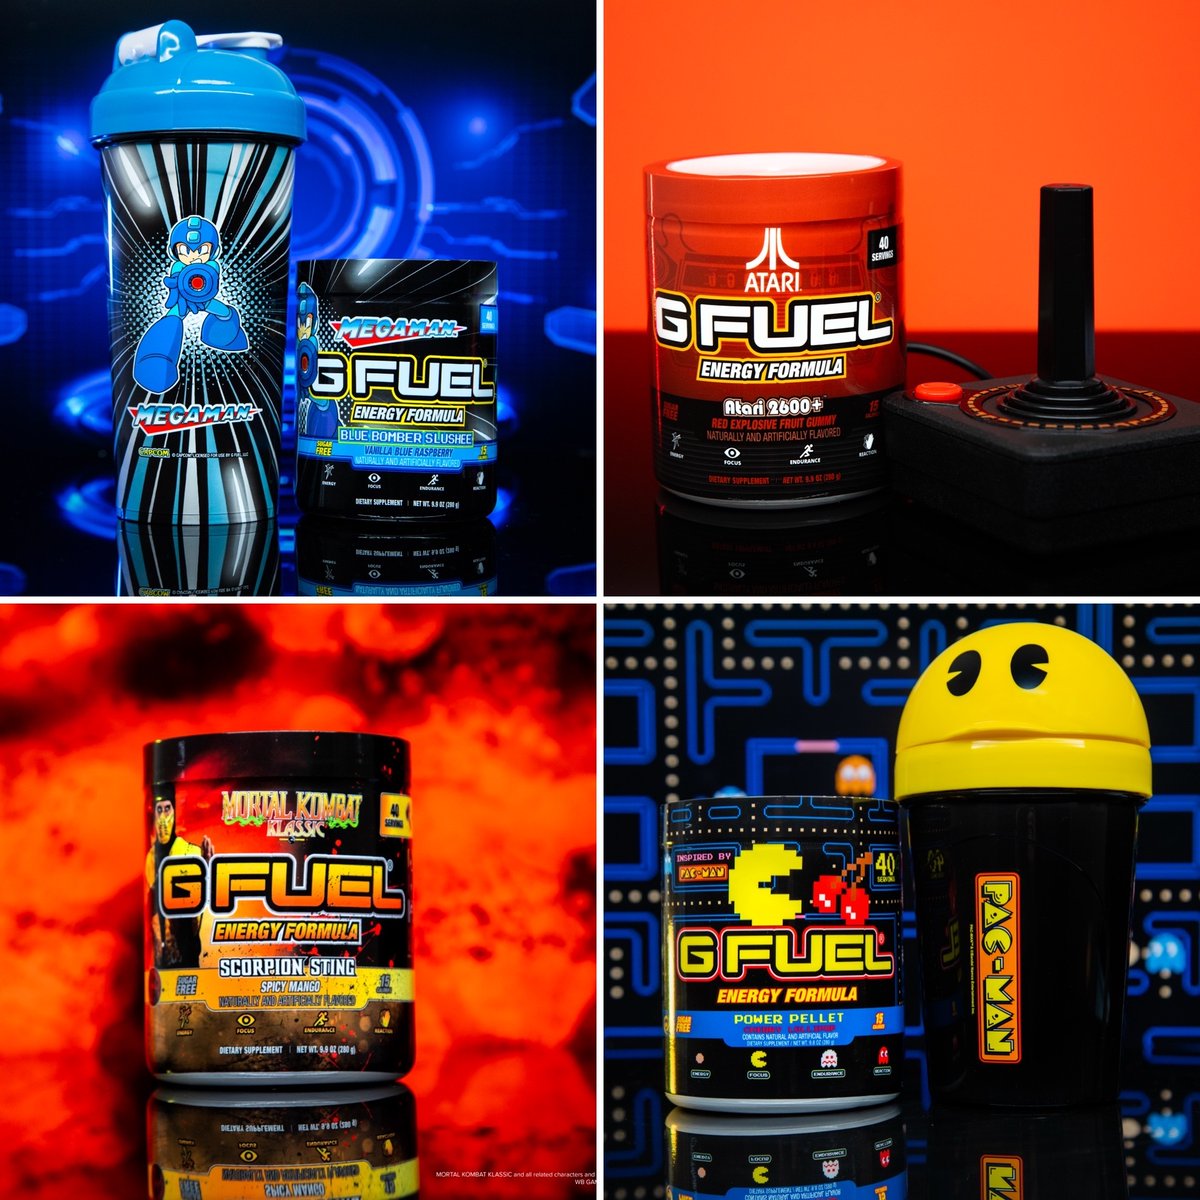 🧡💬 𝗥𝗧 + 𝗖𝗼𝗺𝗺𝗲𝗻𝘁 𝘆𝗼𝘂𝗿 𝗳𝗮𝘃 𝗿𝗲𝘁𝗿𝗼 𝗴𝗮𝗺𝗲 to win a #GFUEL retro gaming tub of your choice! 2 winners picked tomorrow bc it's tbt! 🕹️ 

🛒 𝗚𝗘𝗧 𝗬𝗢𝗨𝗥𝗦: GFUEL.com/collections/tu…